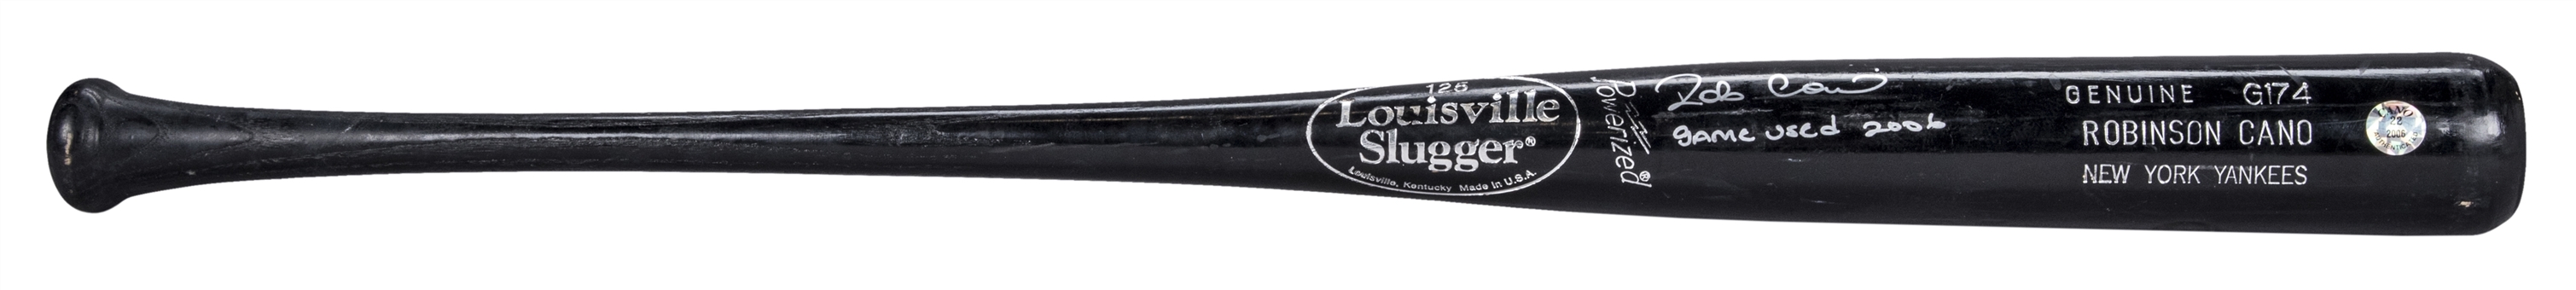 2006 Robinson Cano Game Used and Signed/Inscribed Louisville Slugger C174 Model Bat (Beckett & PSA/DNA GU 8)